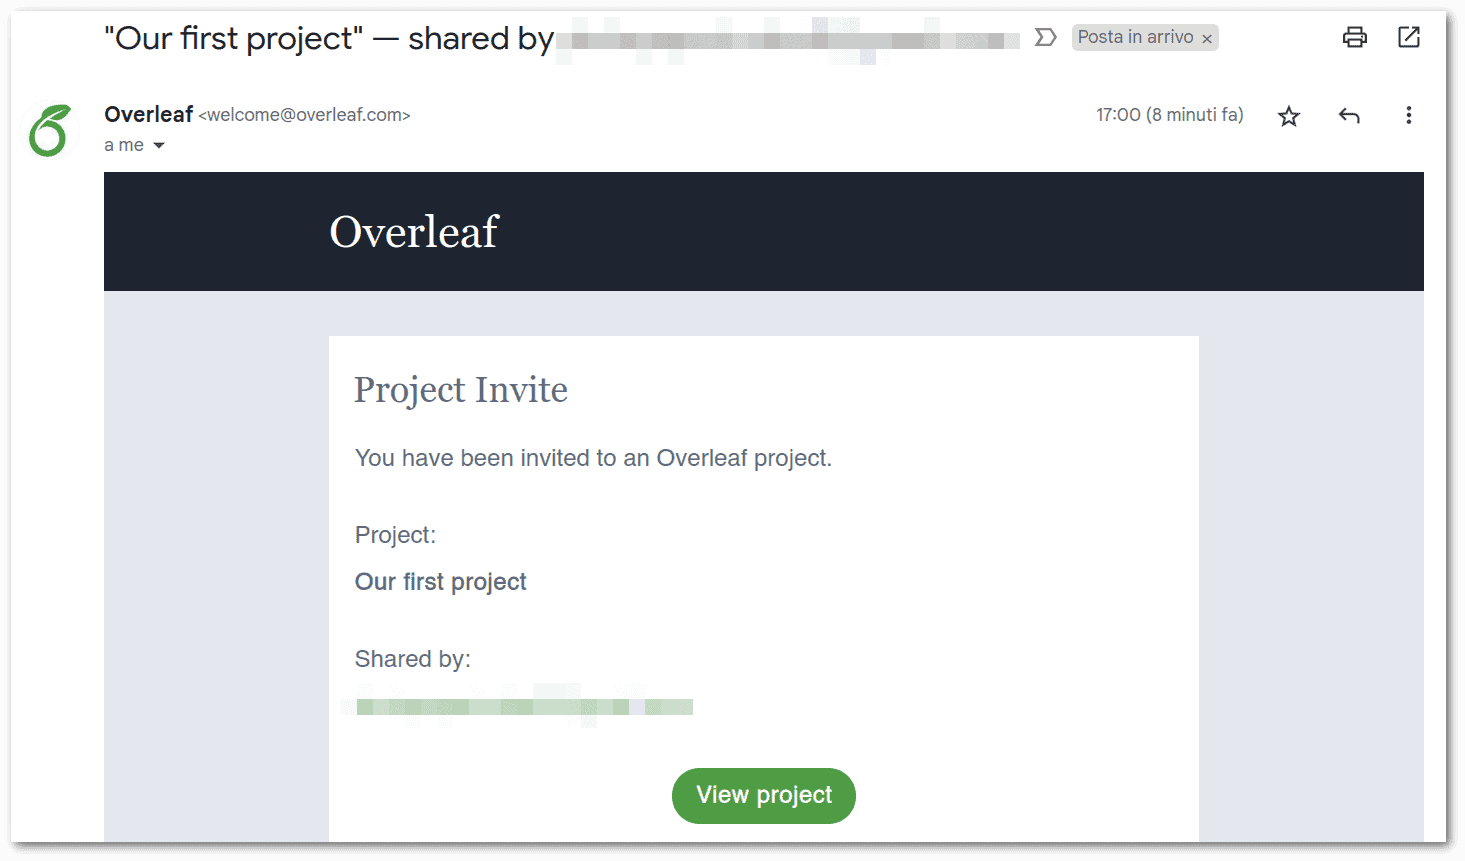 Overleaf Email to invited person